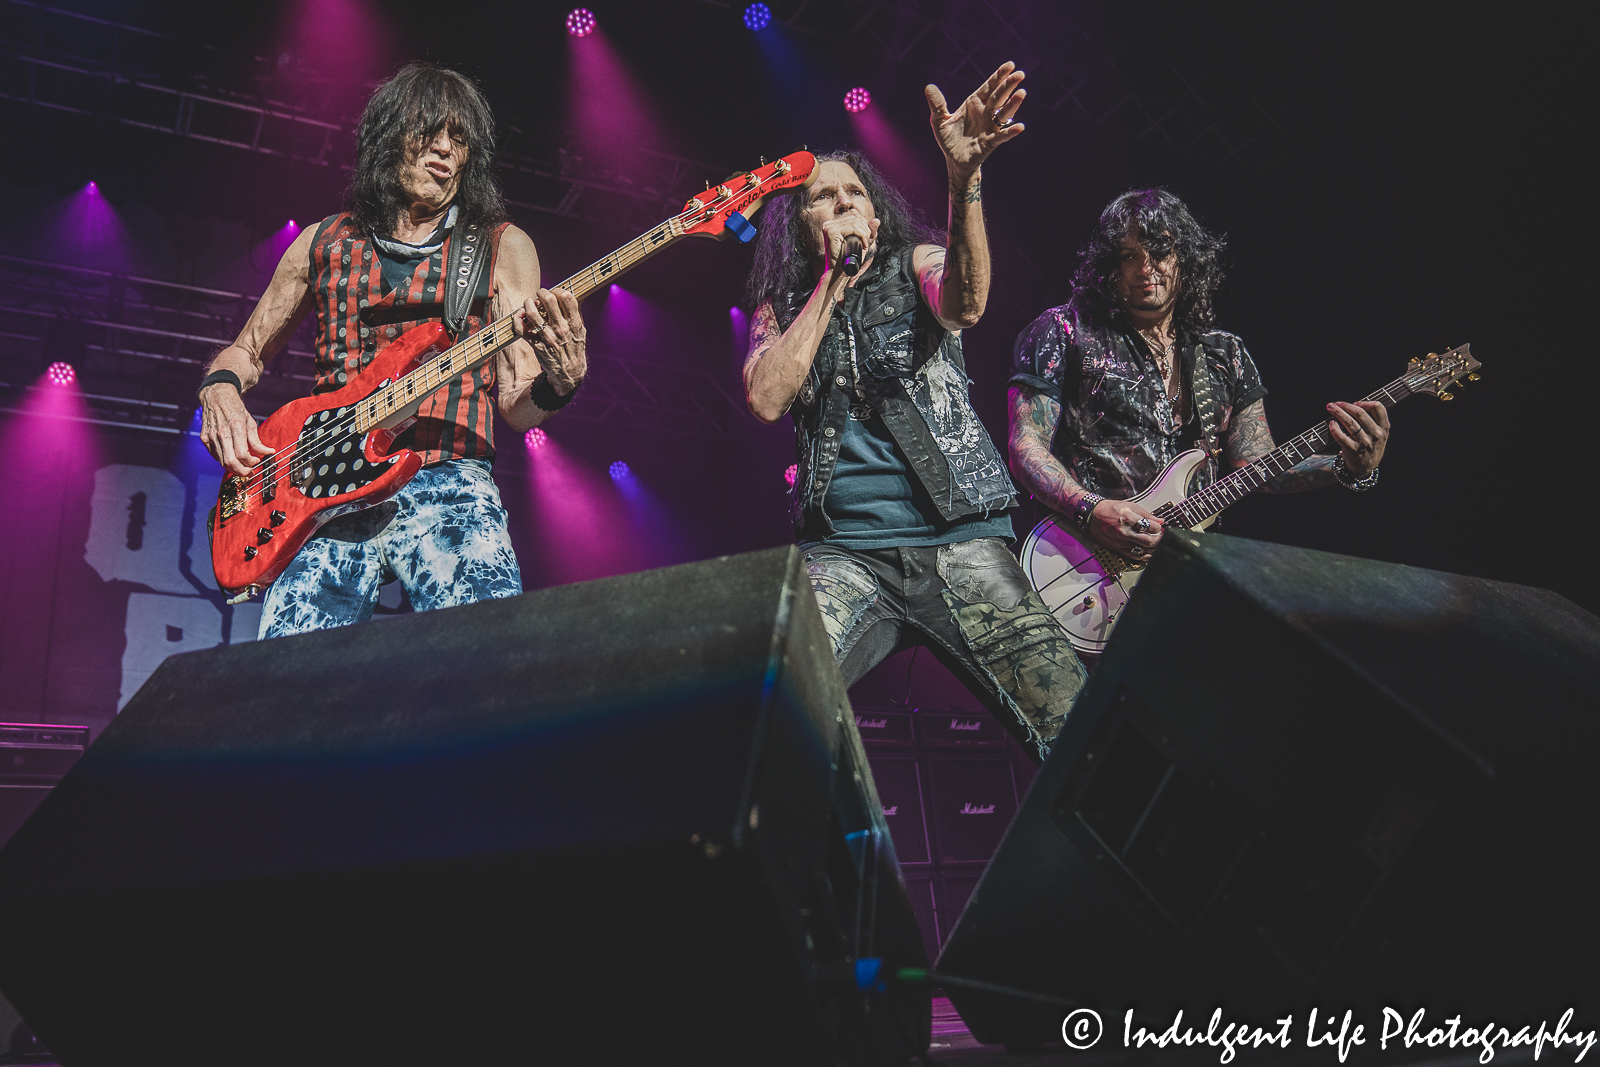 Quiet Riot band members Rudy Sarzo, Jizzy Pearl and Alex Grossi performing live together at Ameristar Casino's Star Pavilion in Kansas City, MO on July 29, 2022.